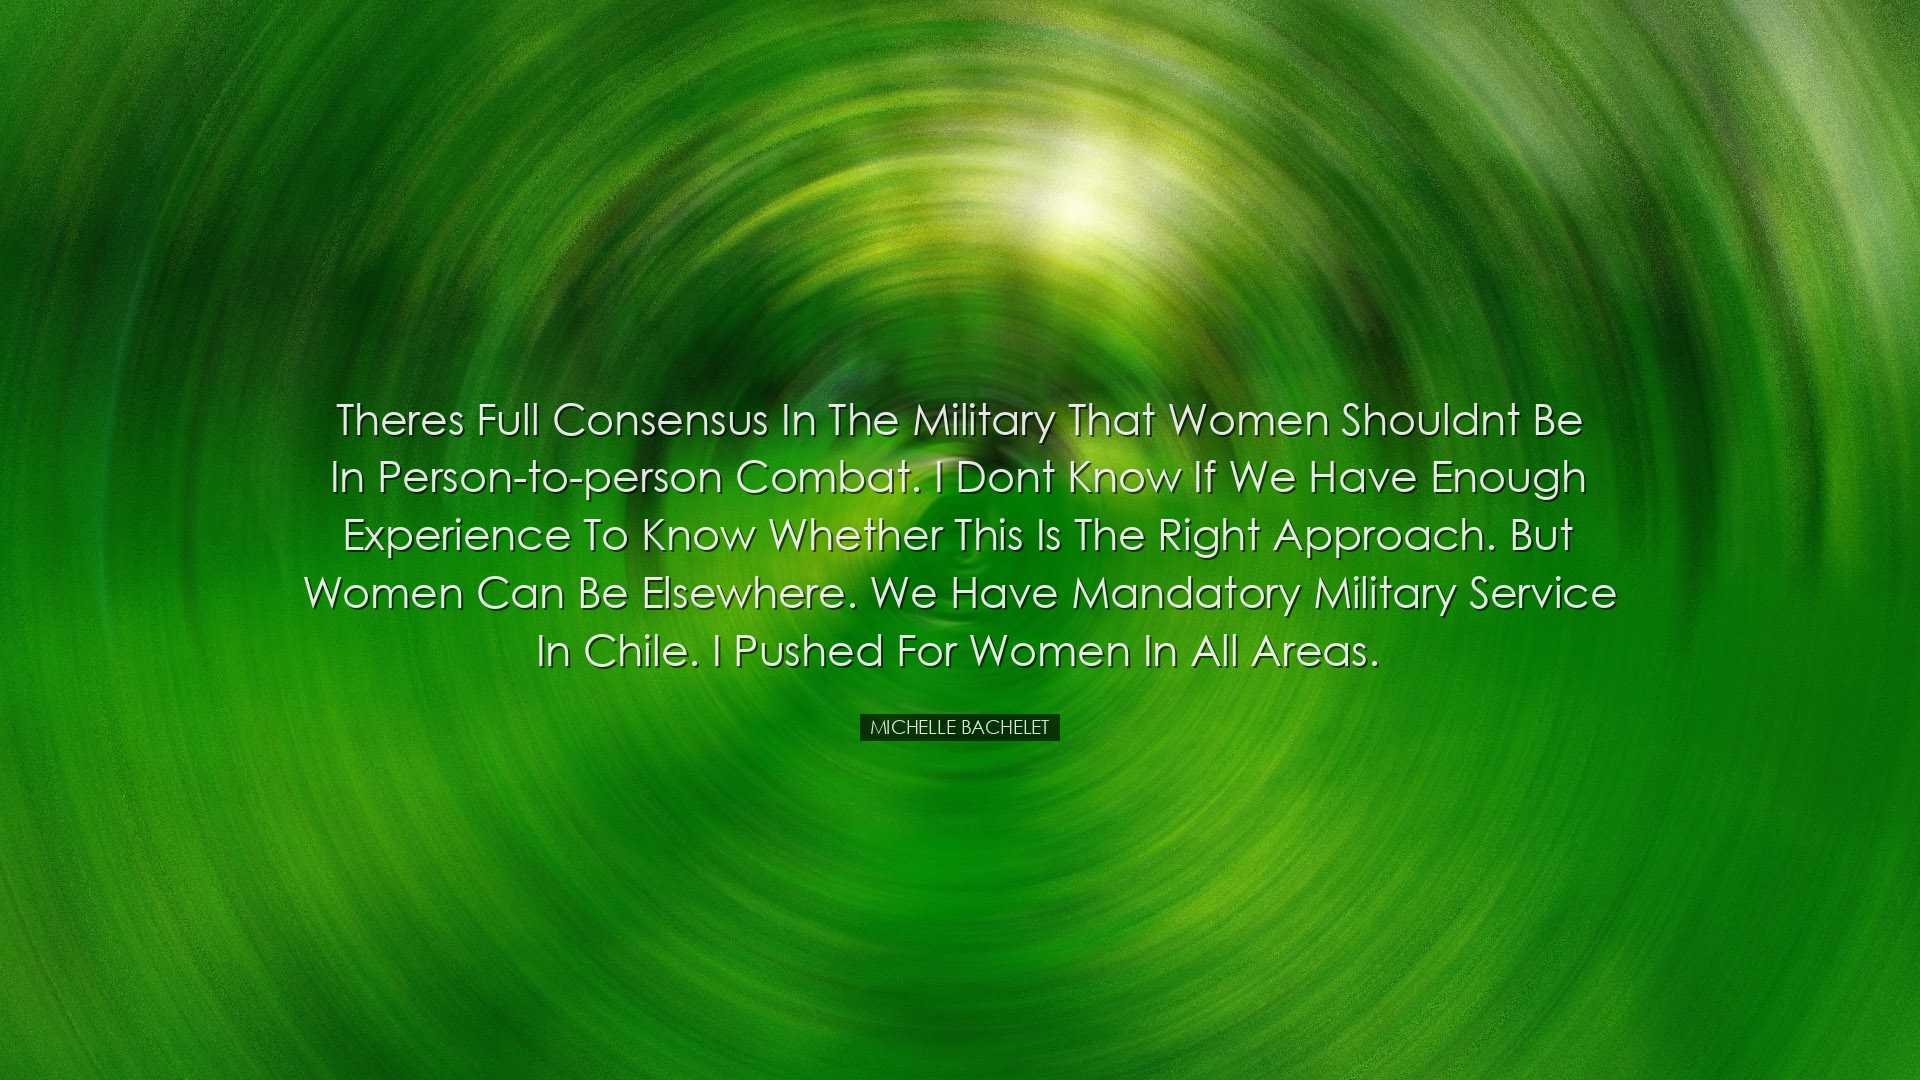 Theres full consensus in the military that women shouldnt be in pe